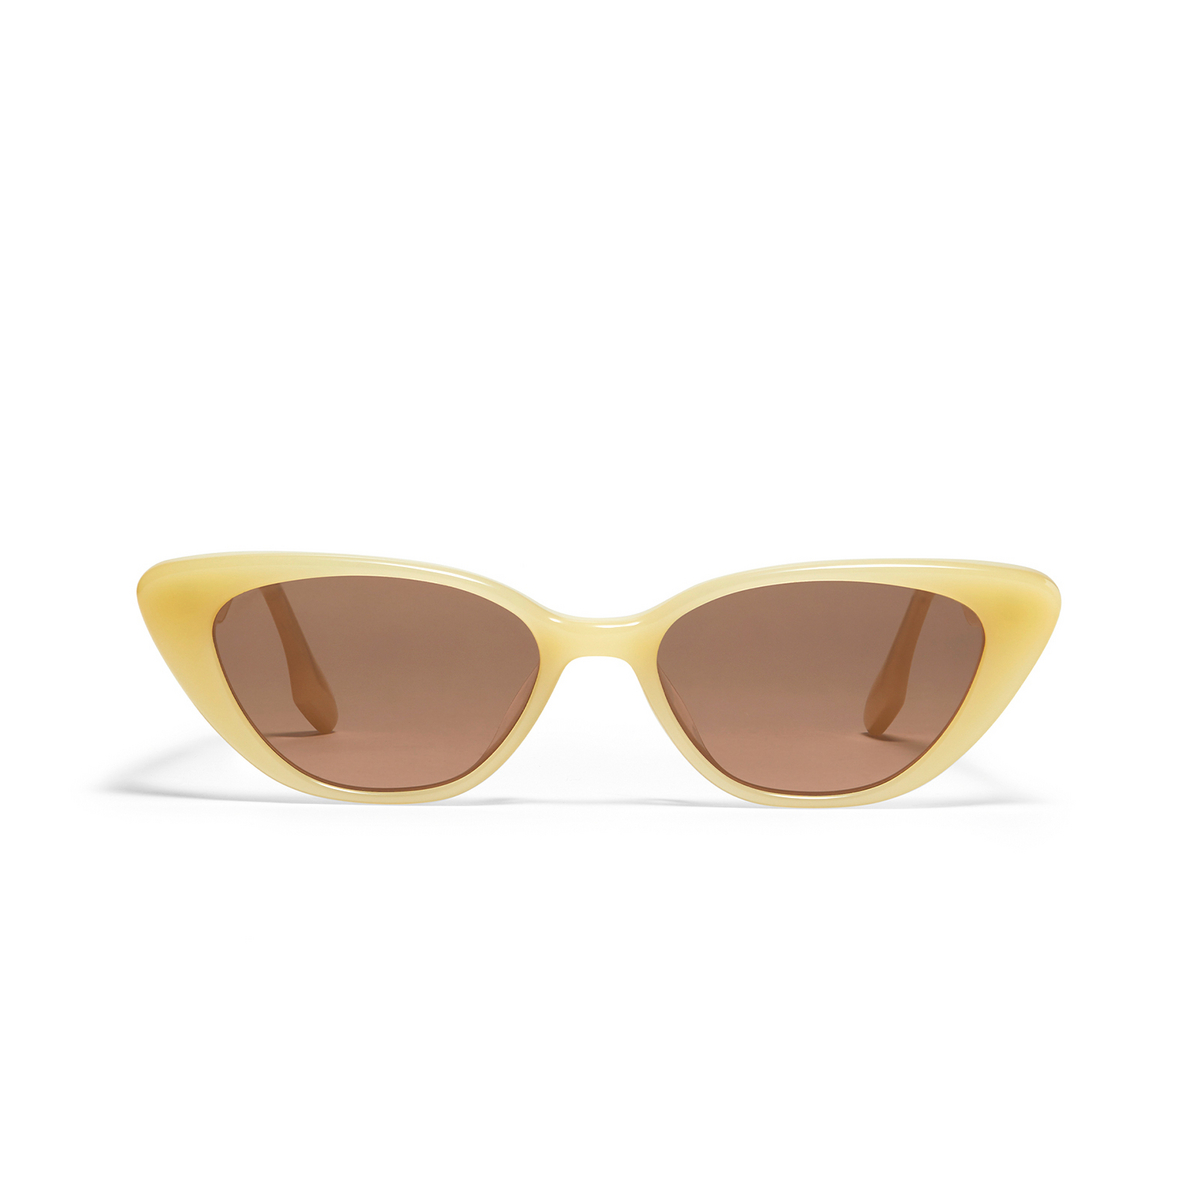 Gentle Monster® Cat-eye Sunglasses: Crella color Yellow Y1 - front view.